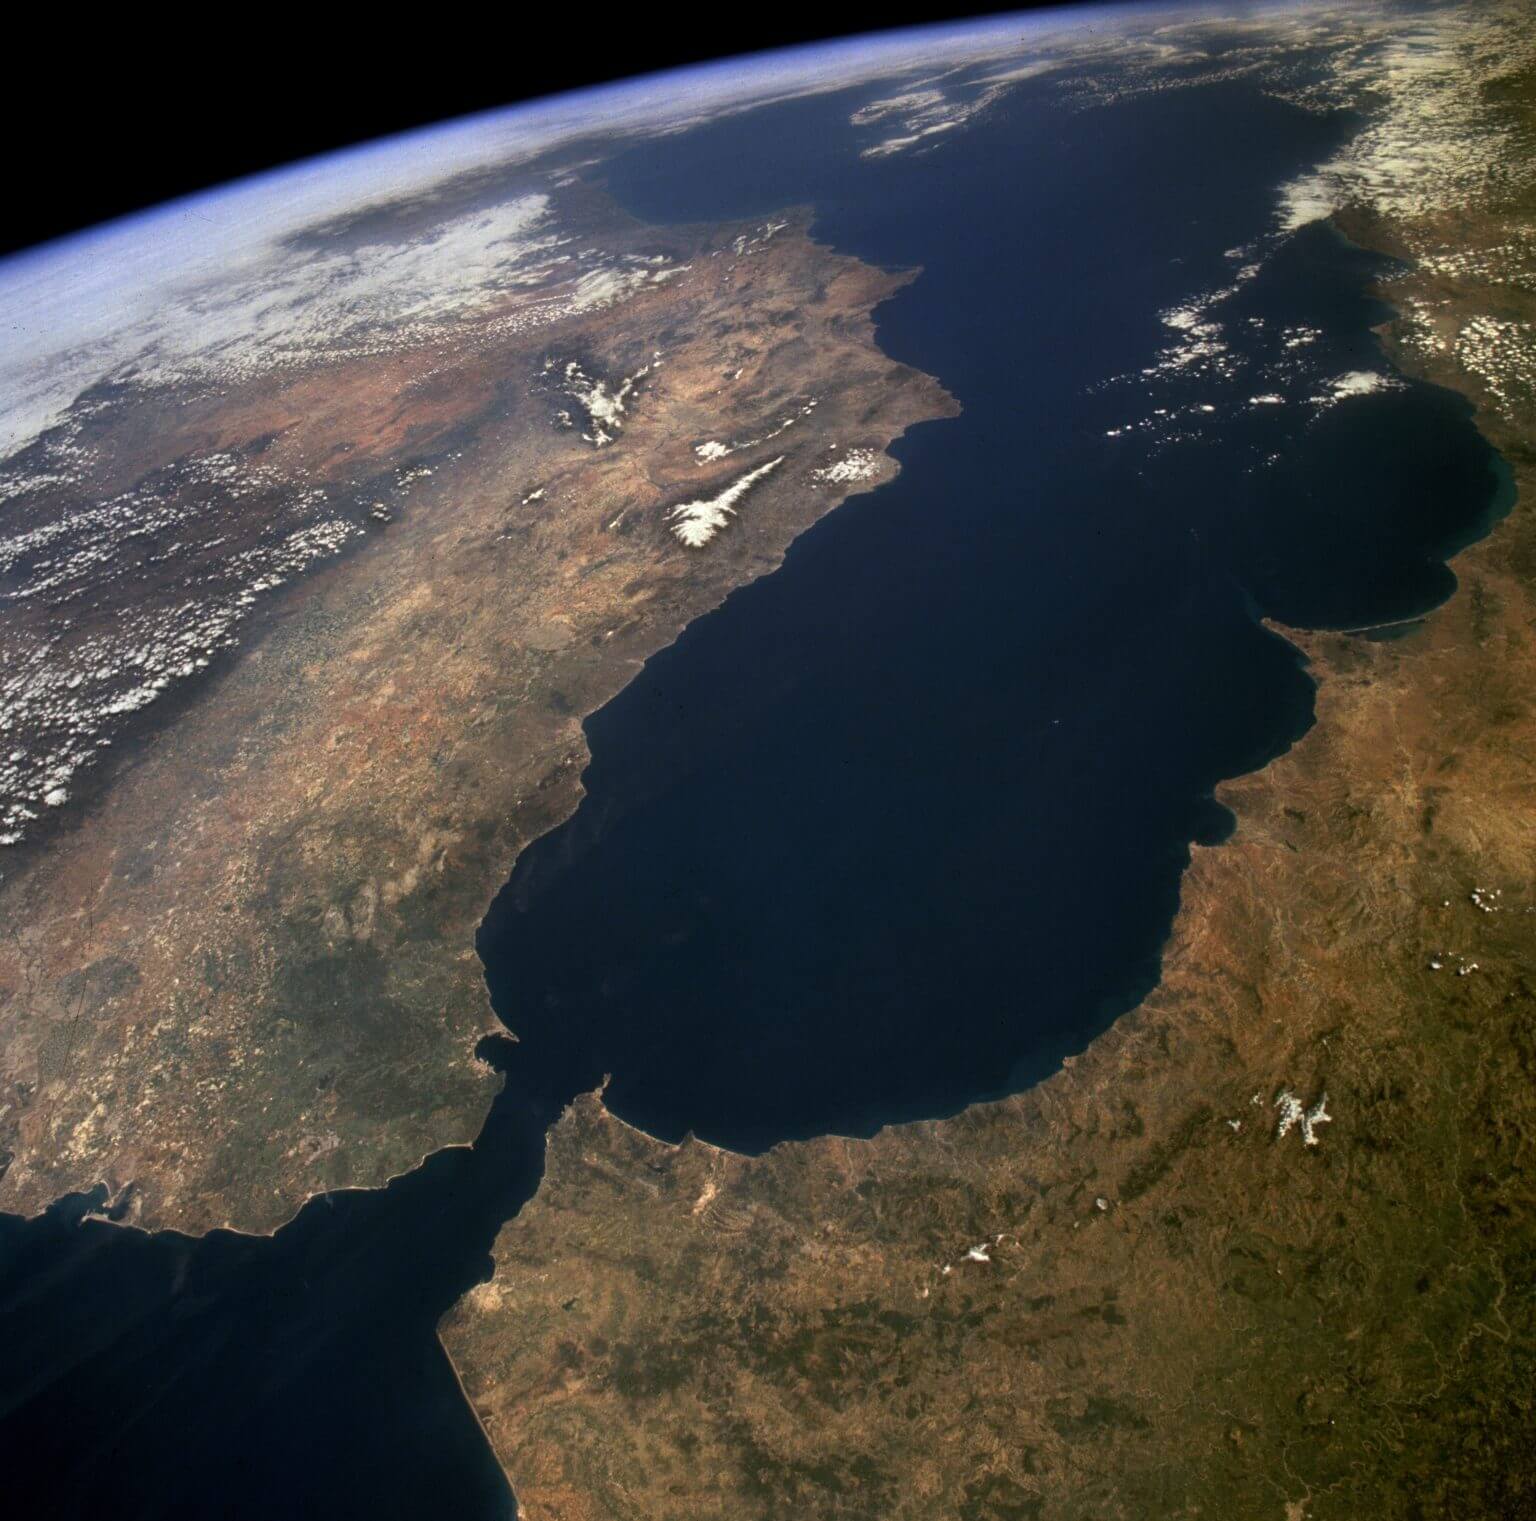 The Strait of Gibraltar is a natural physical barrier between Spain (North) and Morocco (South). In geological terms, it is about 16 kilometers that separate the two countries, as well as between Europe and Africa, and it is located where the two main tectonic plates - the Eurasian plate and the African plate - collide. Credit: NASA